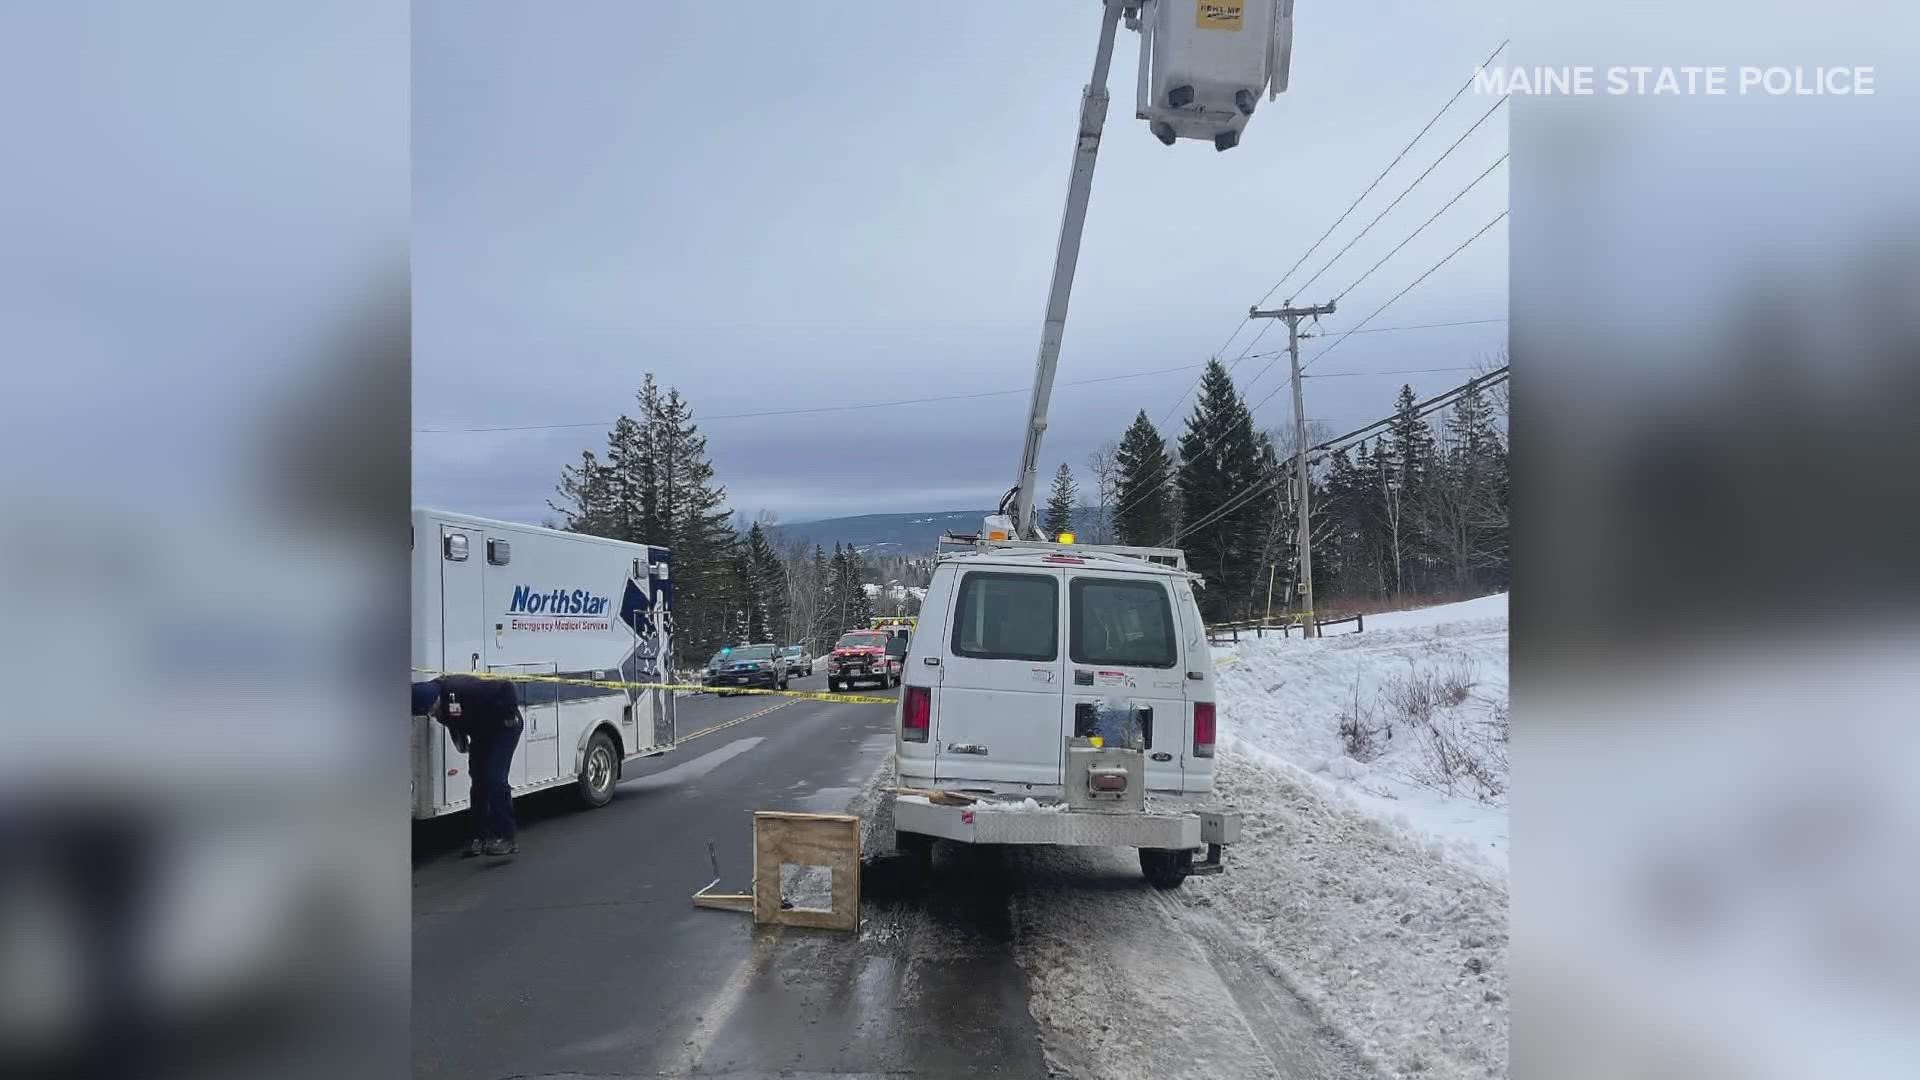 The man died after a bucket truck struck a set of utility wires on Tuesday, police said.